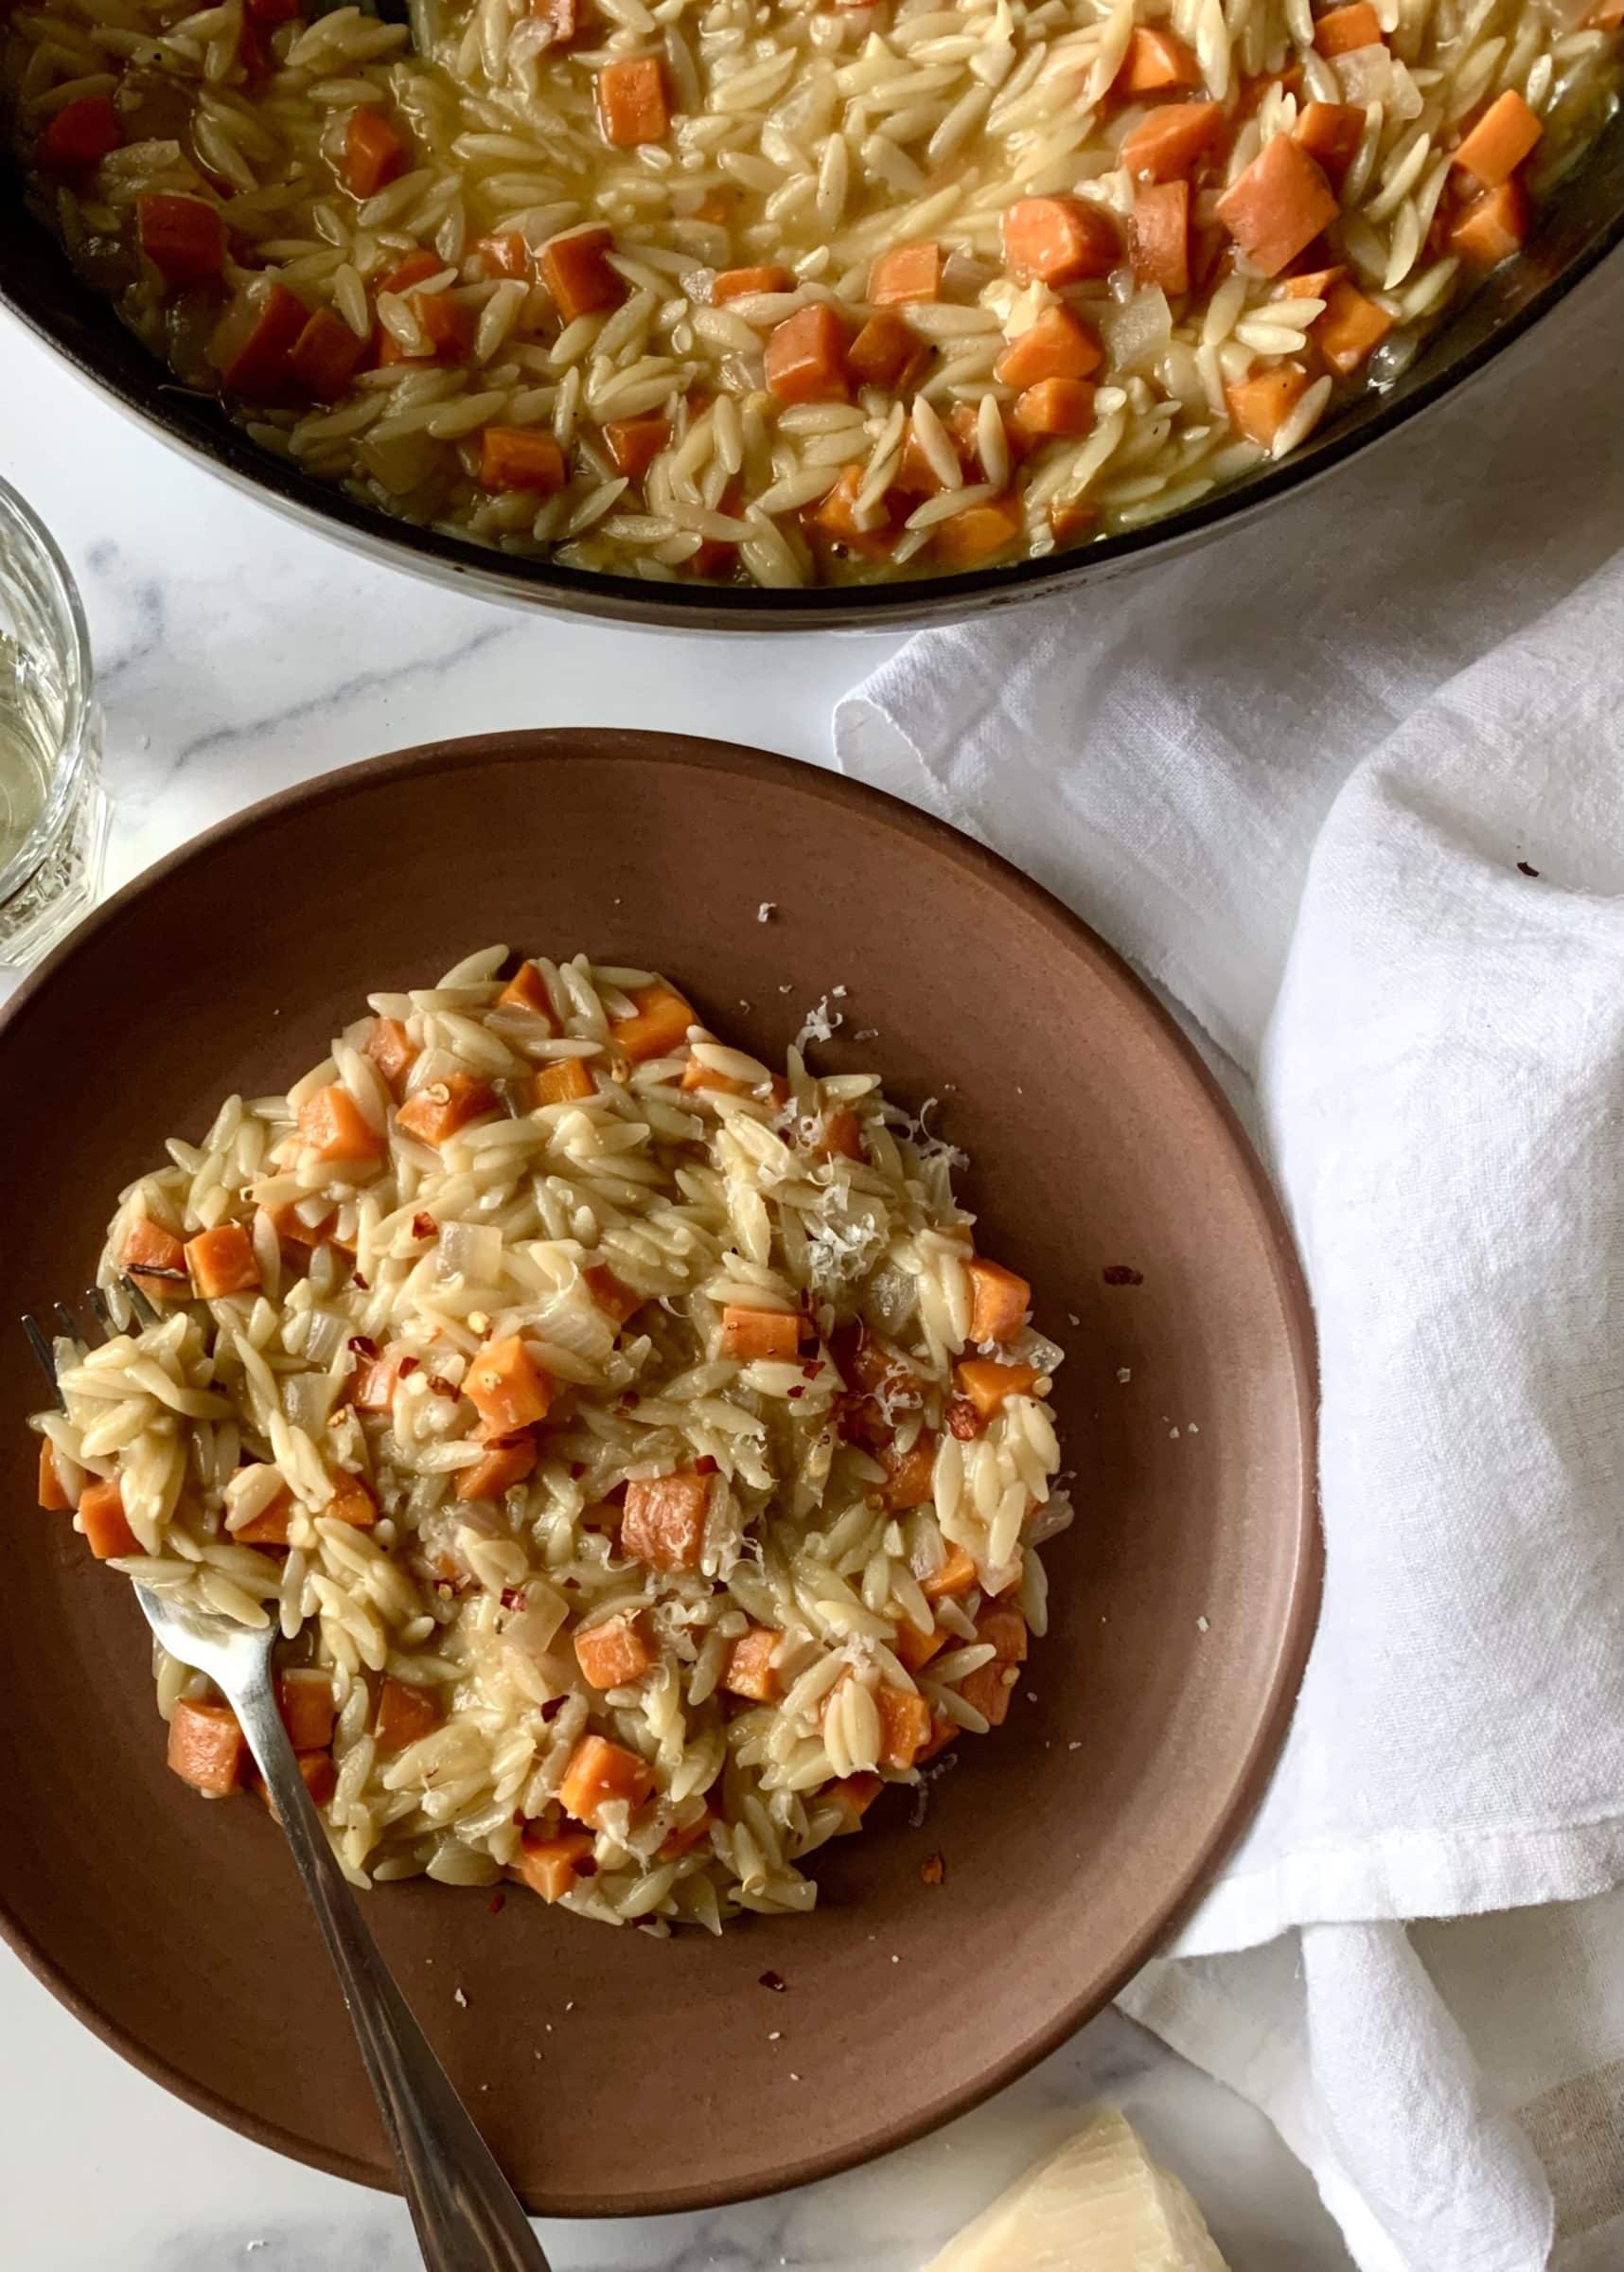 Carrot orzotto